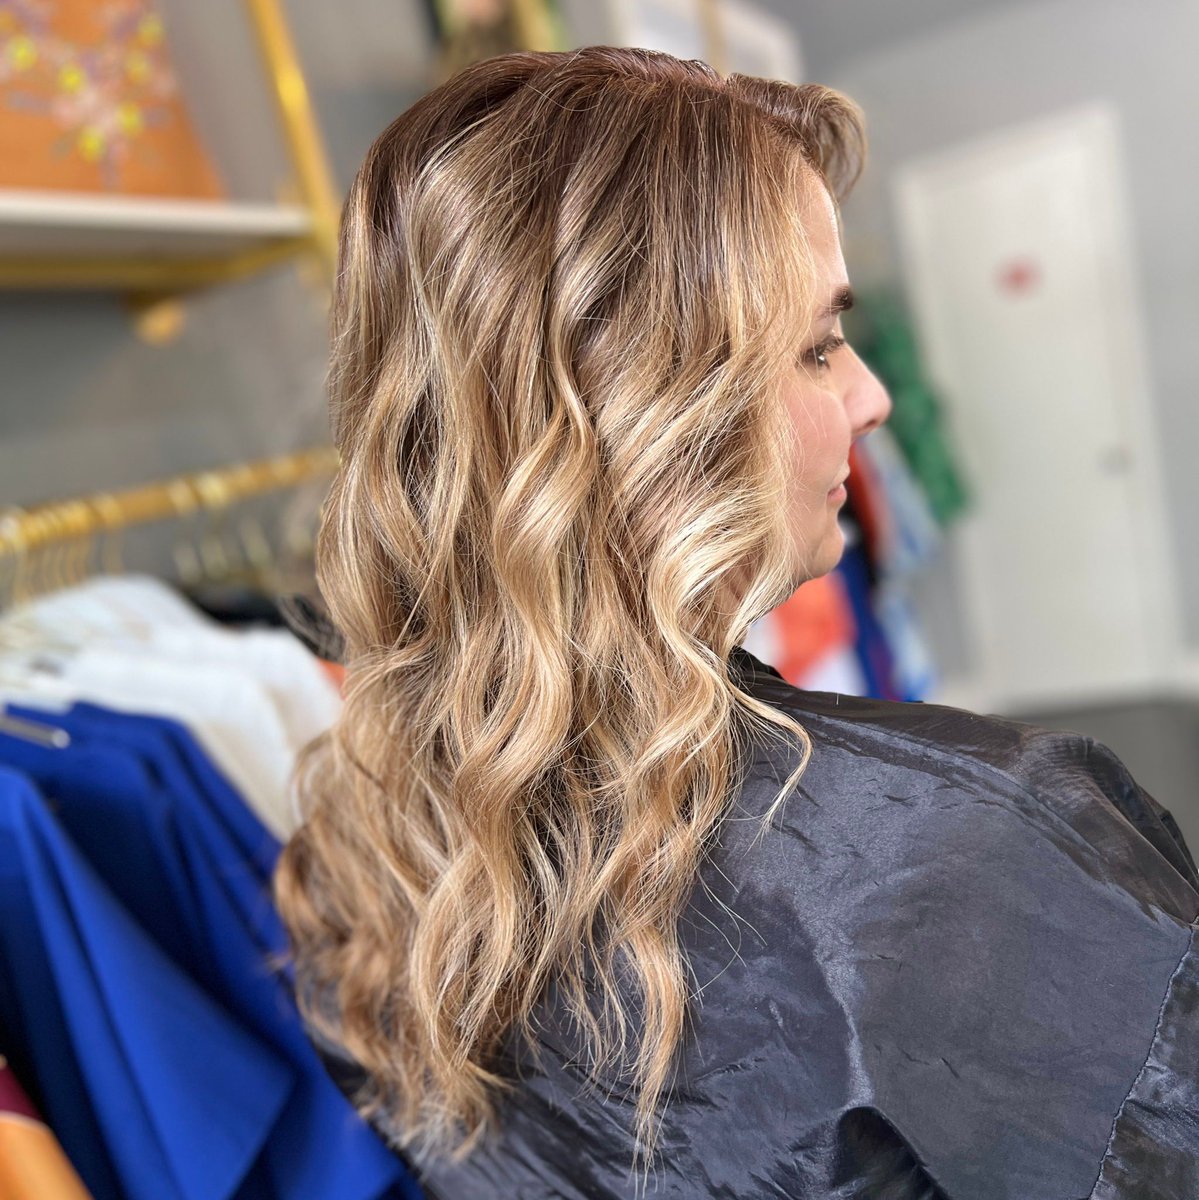 Tracey & Jessi both are so in love with this softer, more blended look! We all know how much Jessi loves balayage! 

#thewoodlands #lavishexperience #wella #houstontx #houston #blowdrybarthewoodlands #lavishthewoodlands #houstonsalon #conroehairsalon #luxuryhairsalon